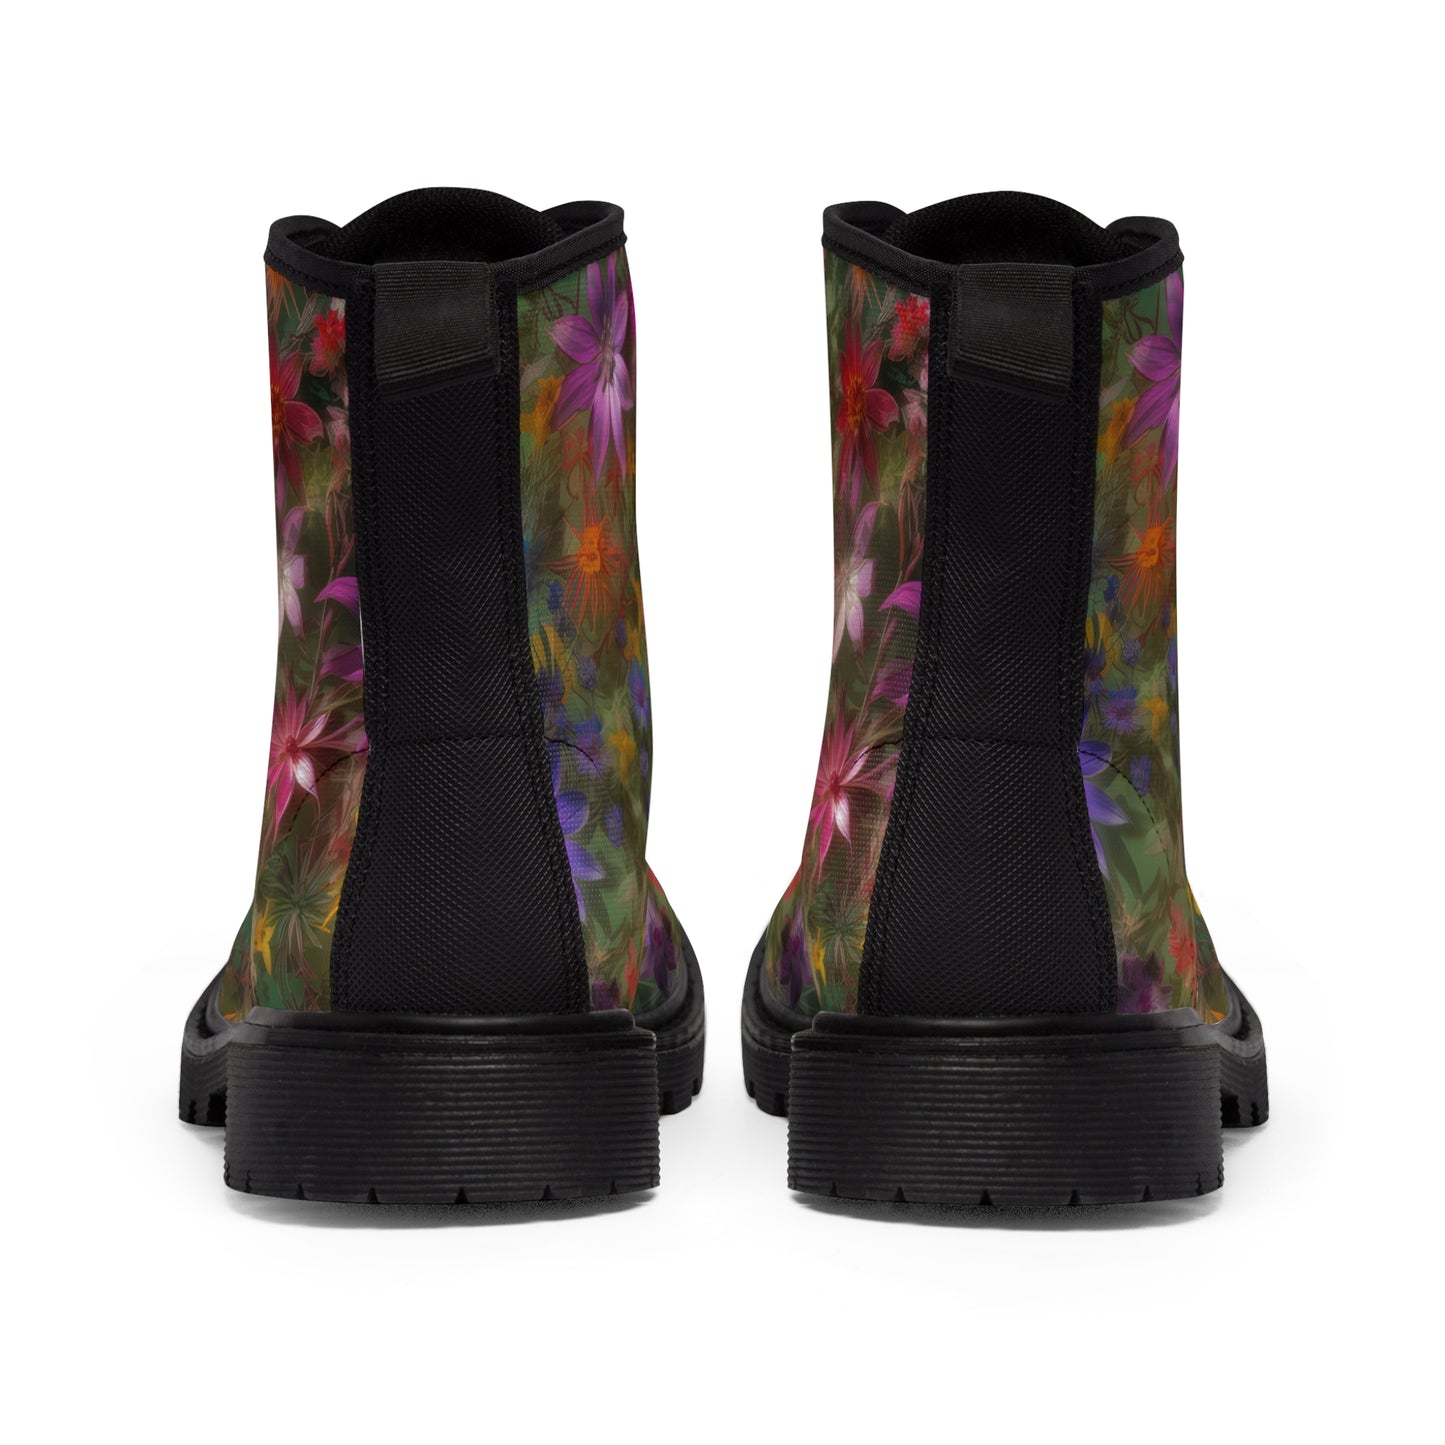 Bold & Beautiful & Metallic Wildflowers, Gorgeous floral Design, Style 3 Women's Canvas Boots